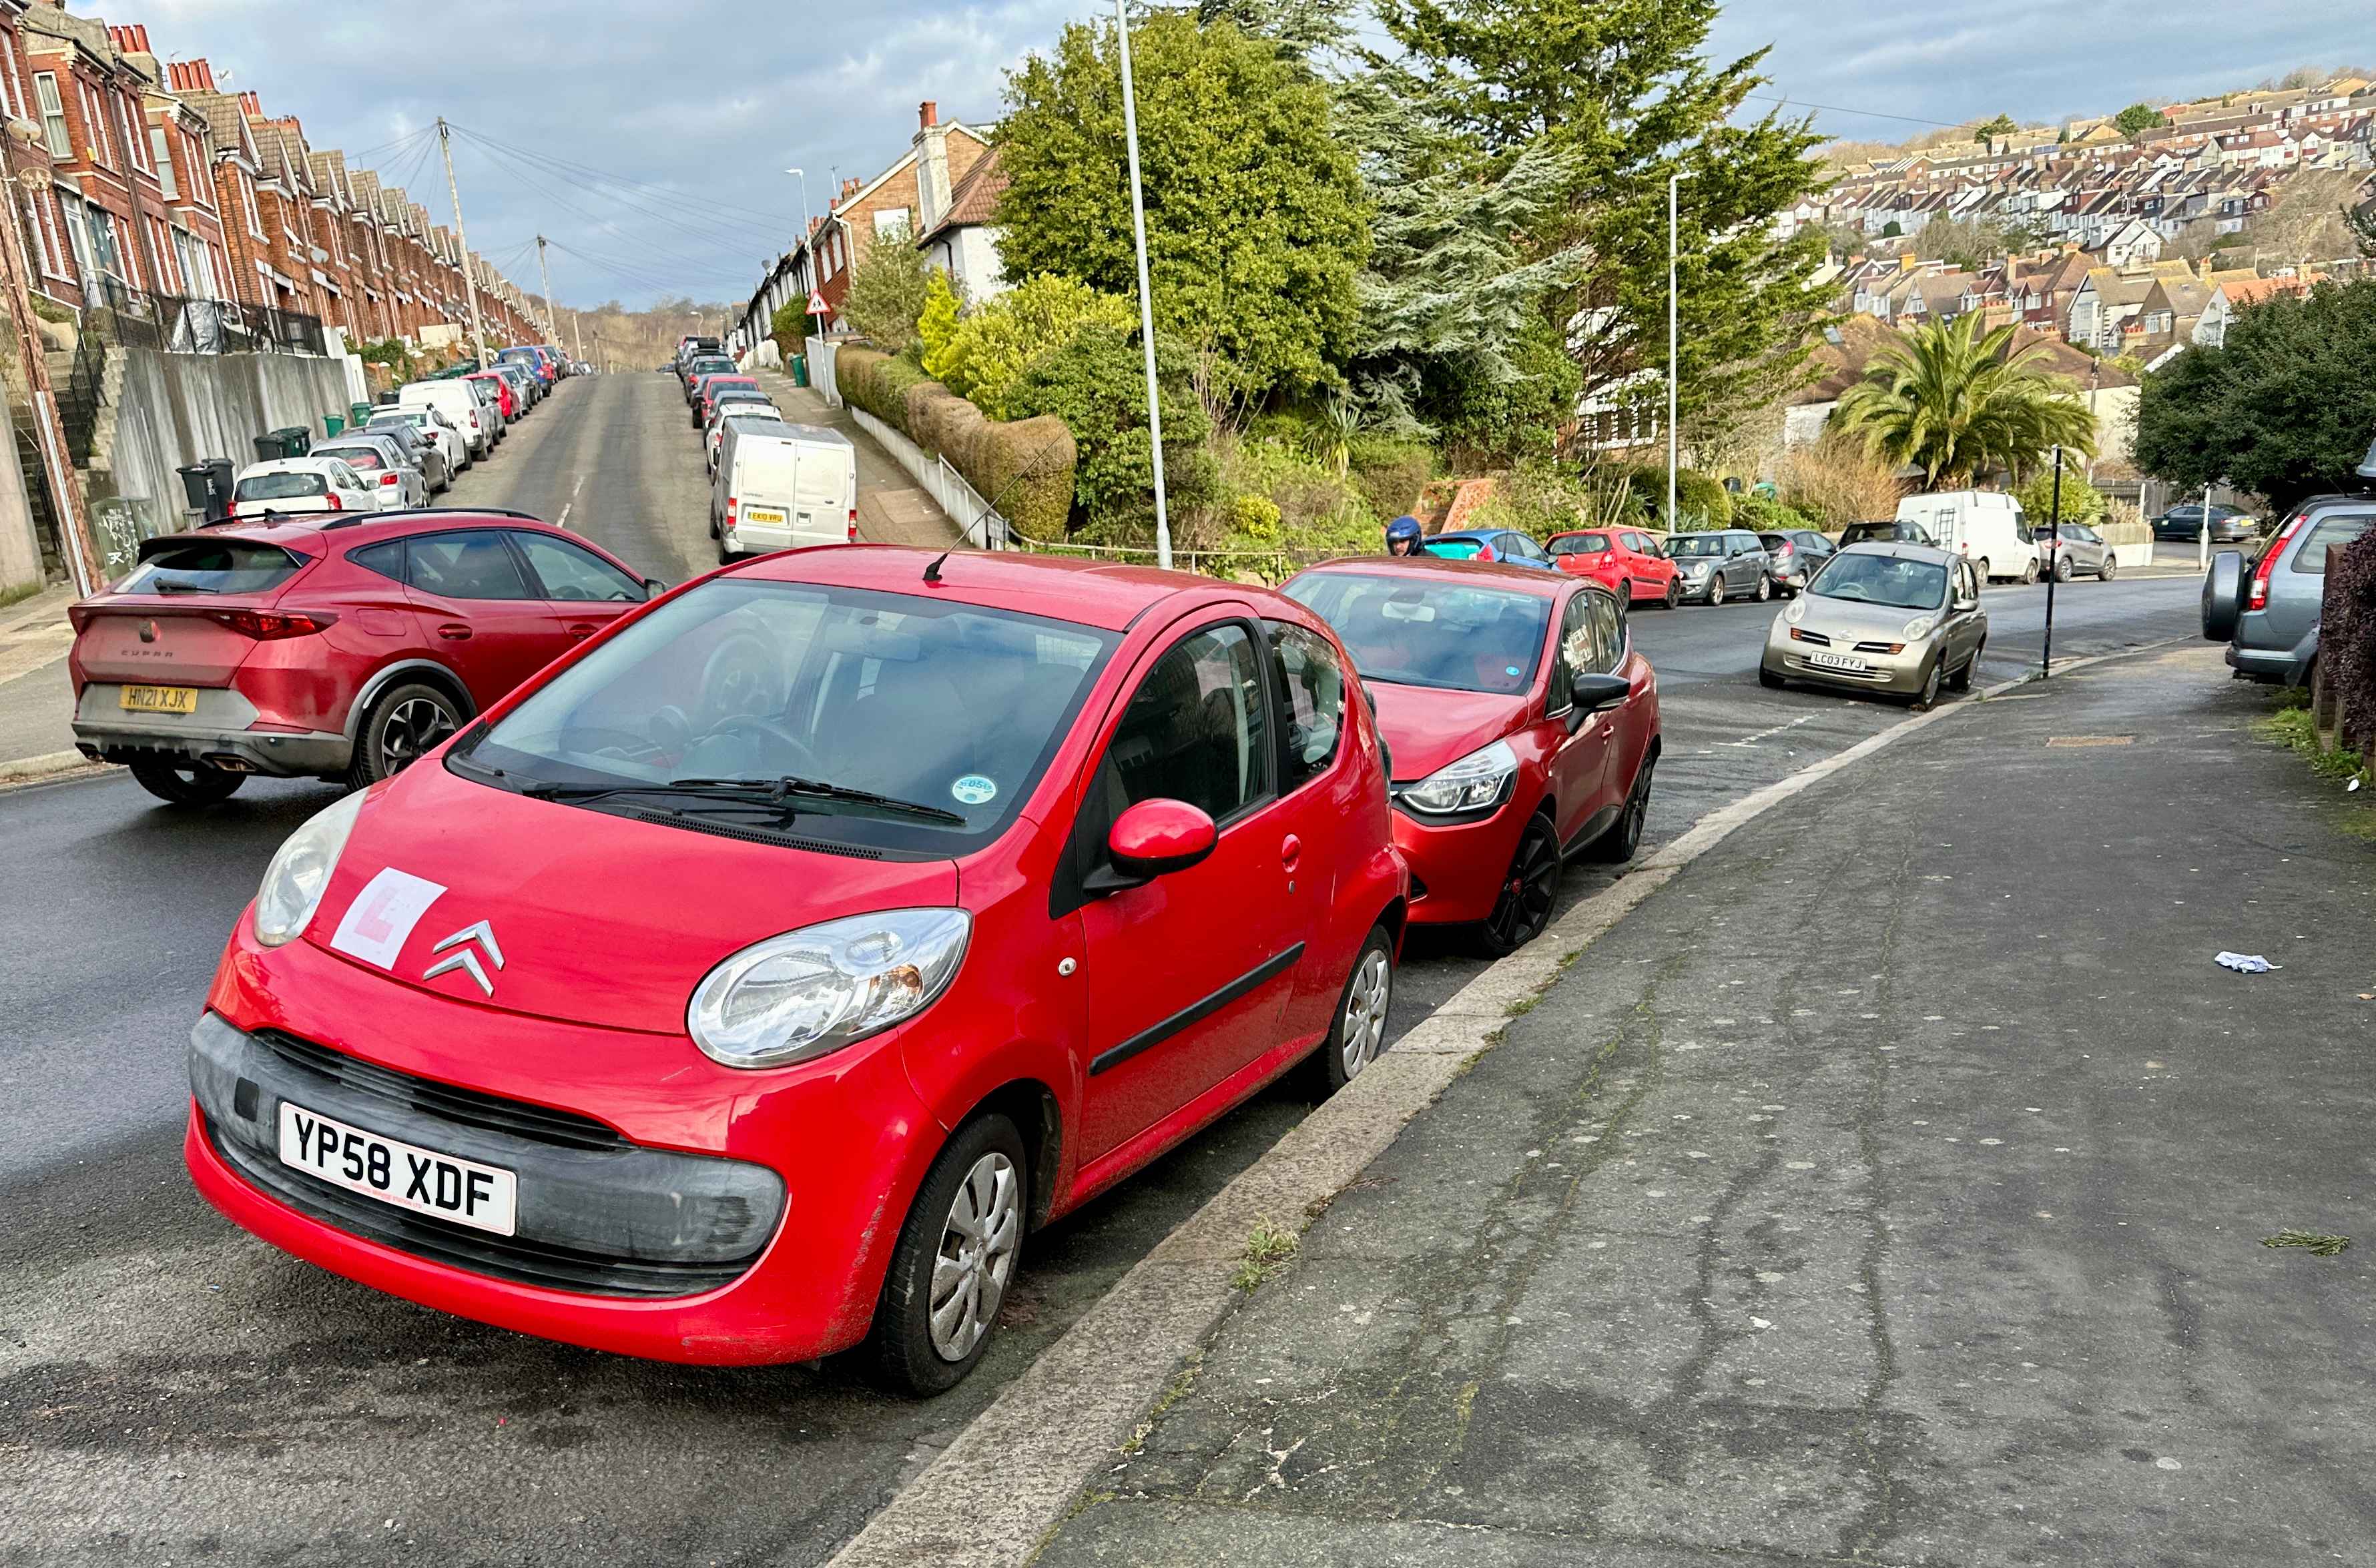 Photograph of YP58 XDF - a Red Citroen C1 parked in Hollingdean by a non-resident, and potentially abandoned. The third of five photographs supplied by the residents of Hollingdean.